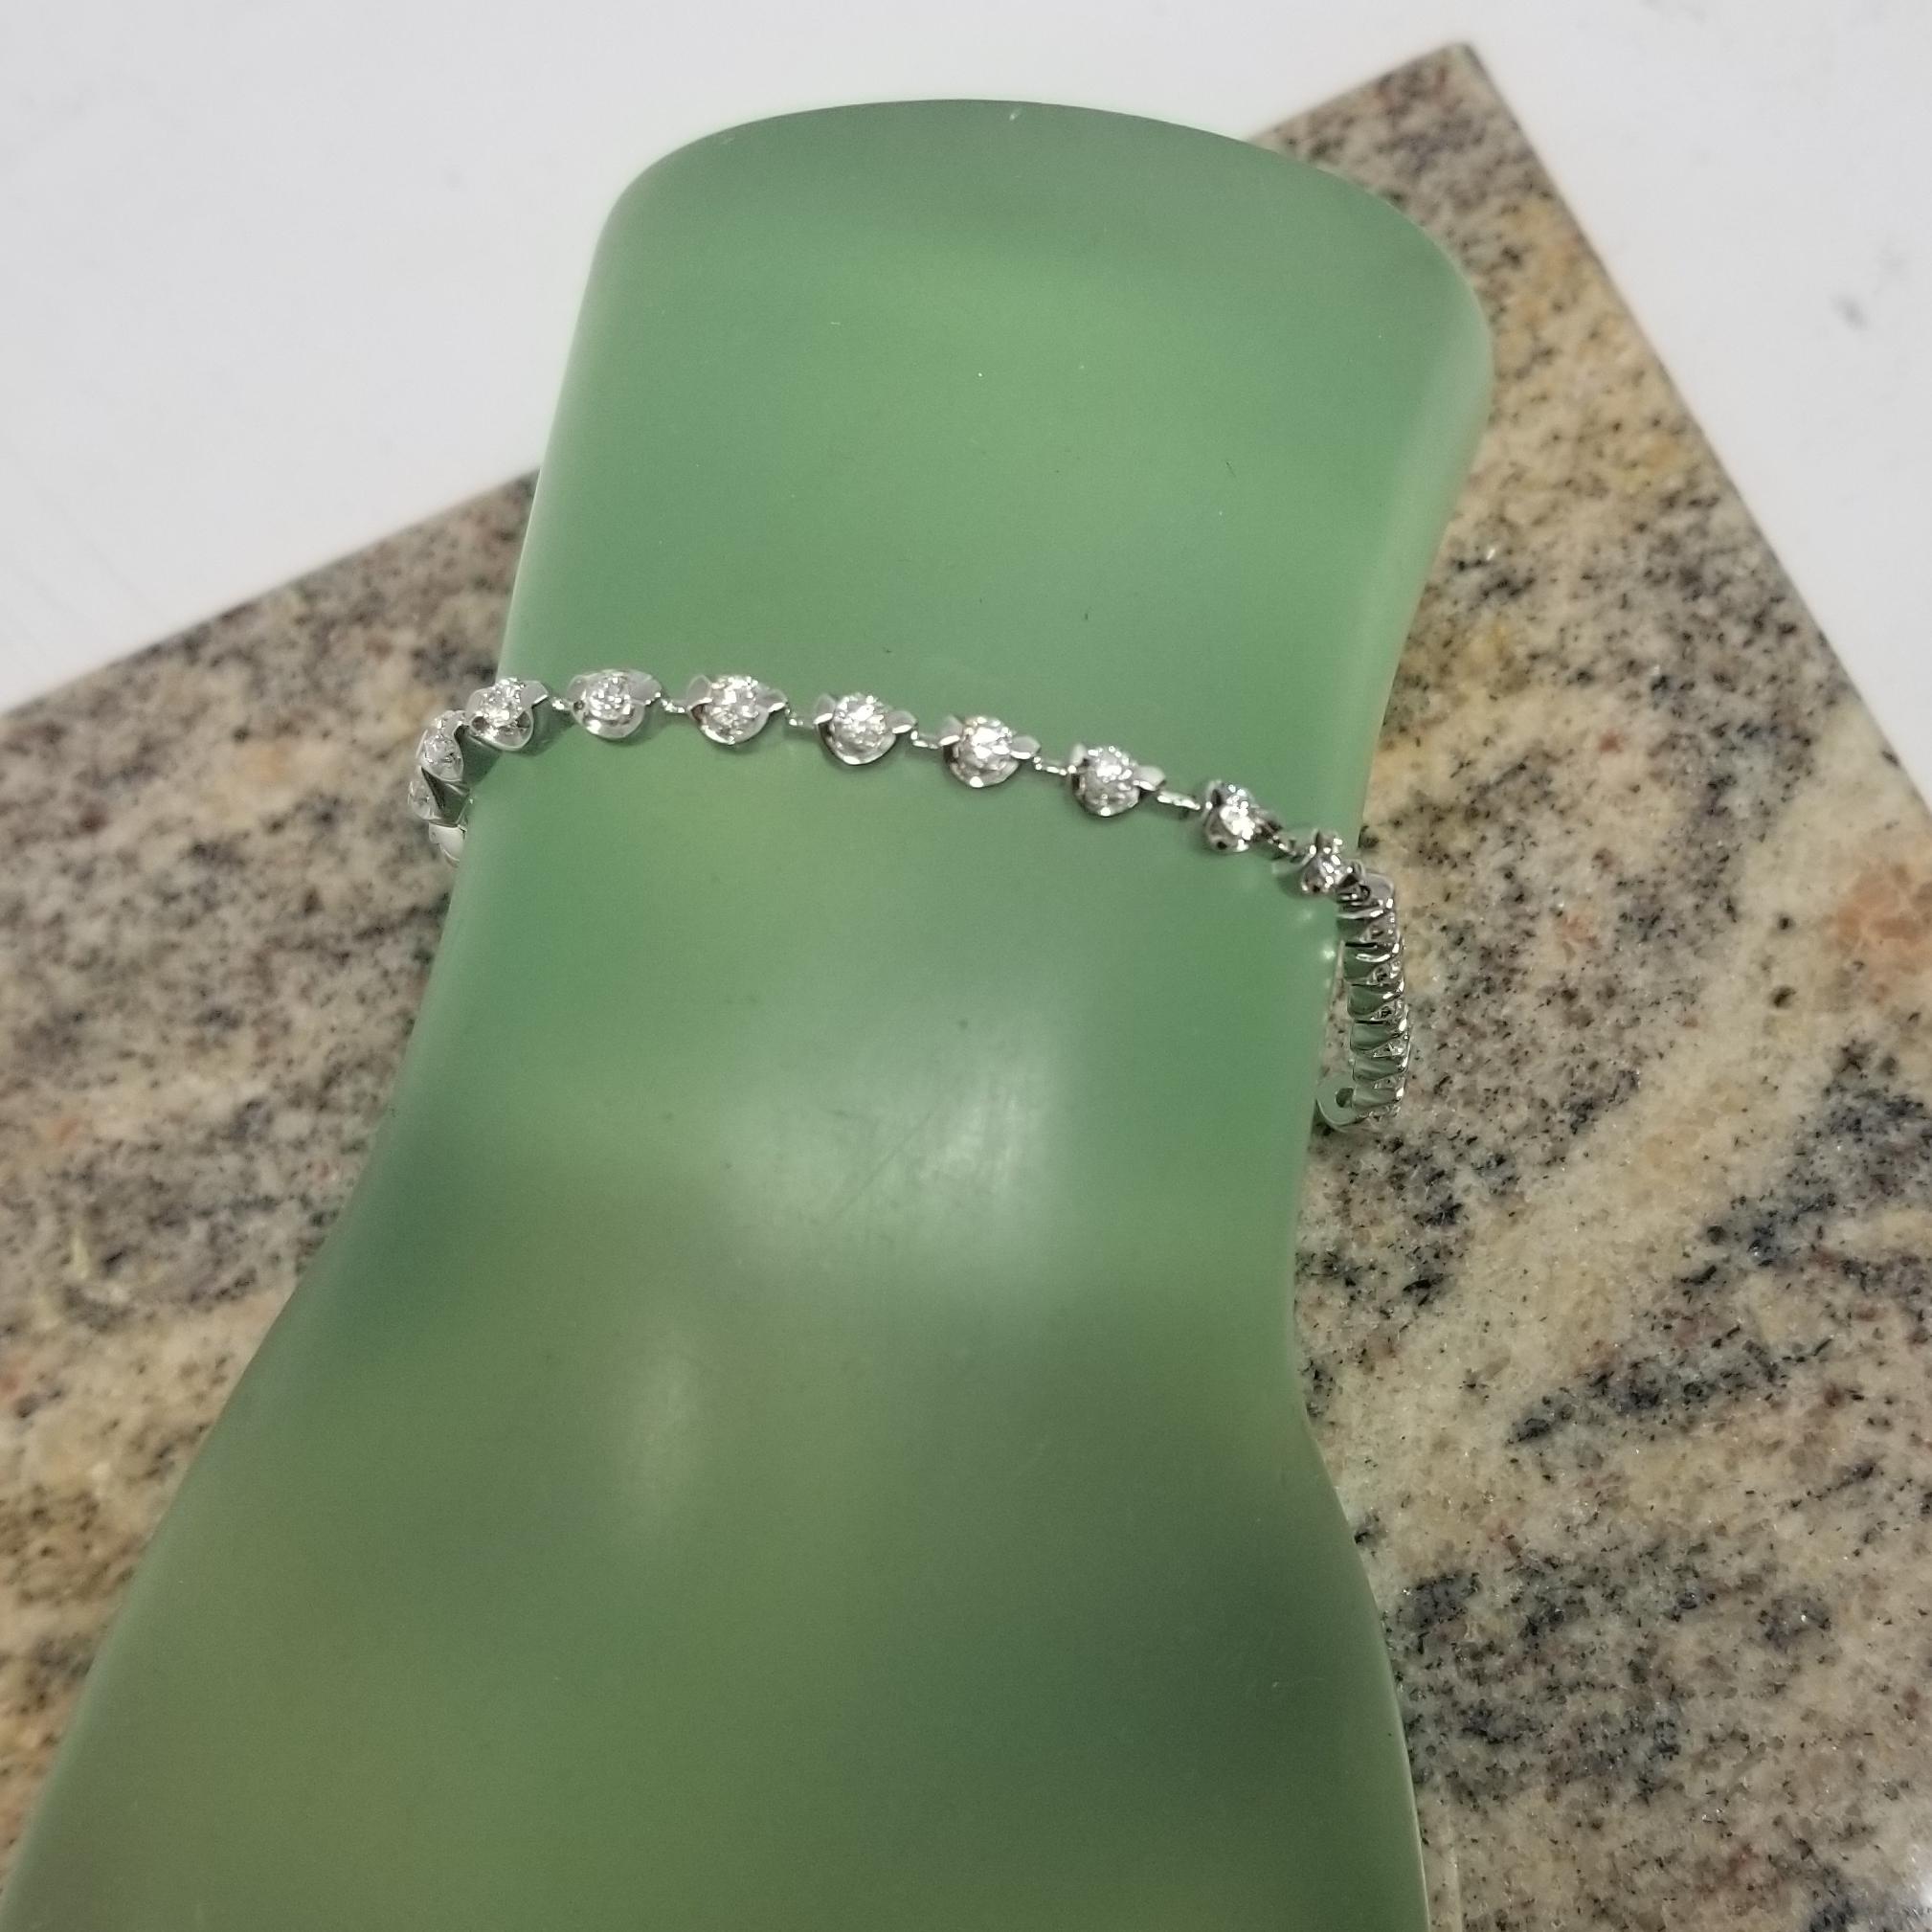 18k White Gold Illusion Tennis Setting to Make a Diamond Look Larger 2.03cts. In New Condition For Sale In Los Angeles, CA